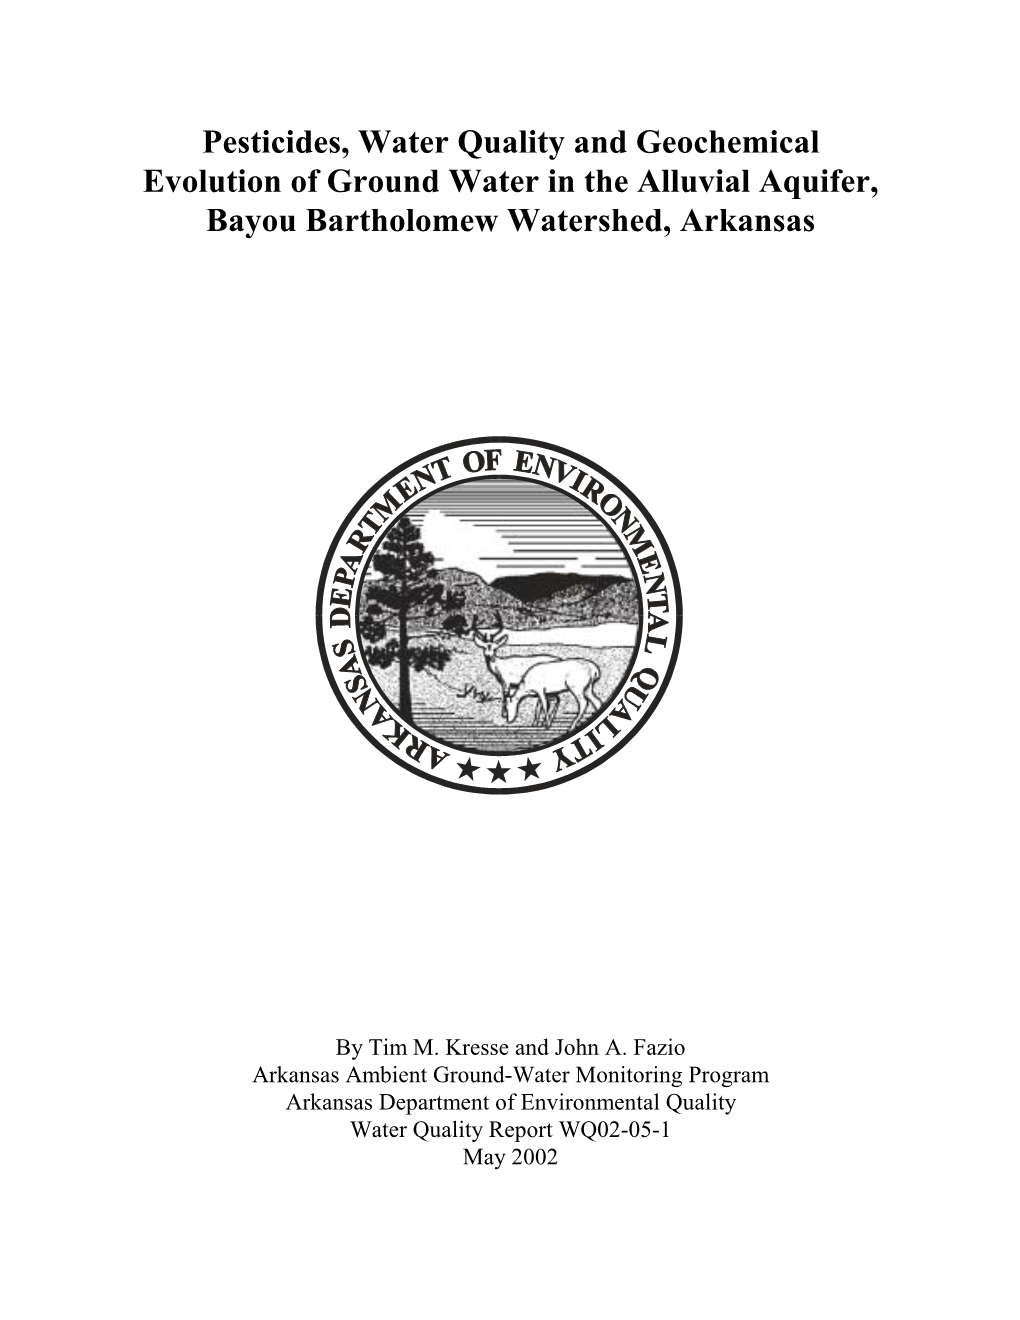 Pesticides, Water Quality and Geochemical Evolution of Ground Water in the Alluvial Aquifer, Bayou Bartholomew Watershed, Arkansas